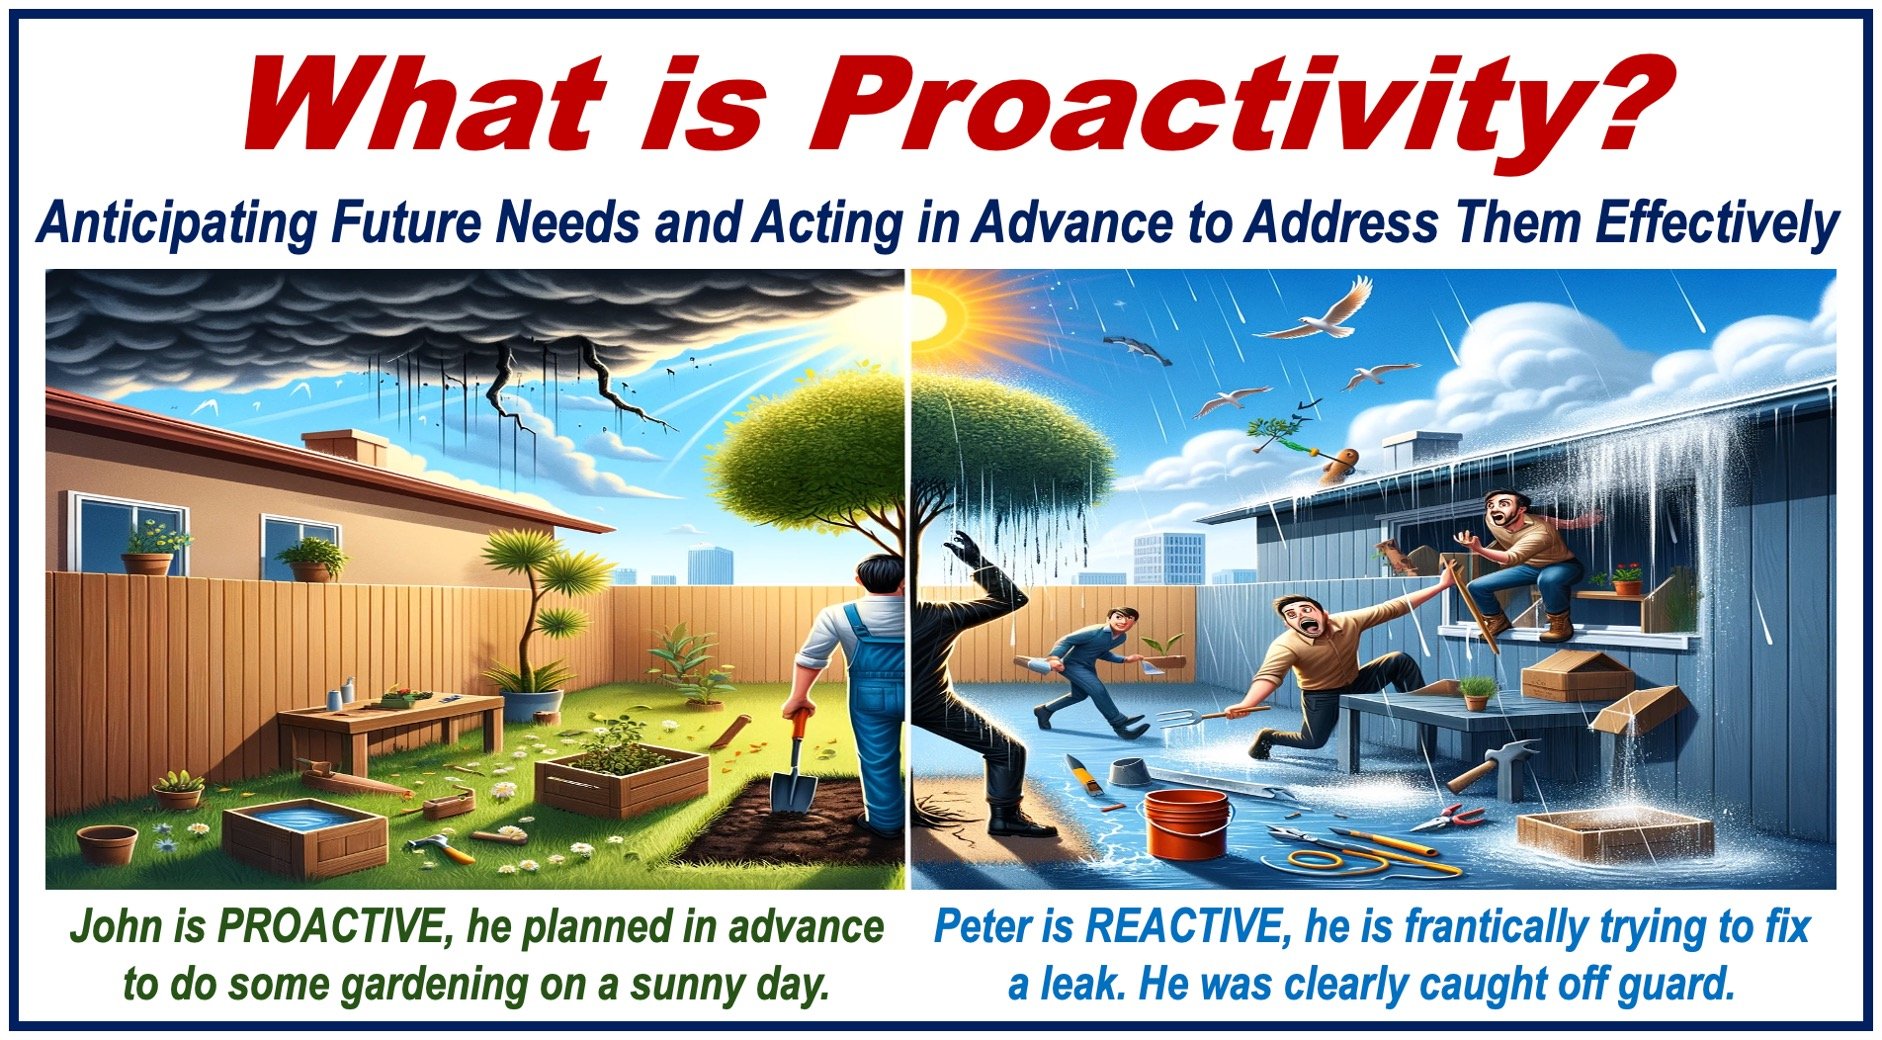 Two images depicting a proactive and reactive person, plus a definition of PROACTIVITY.